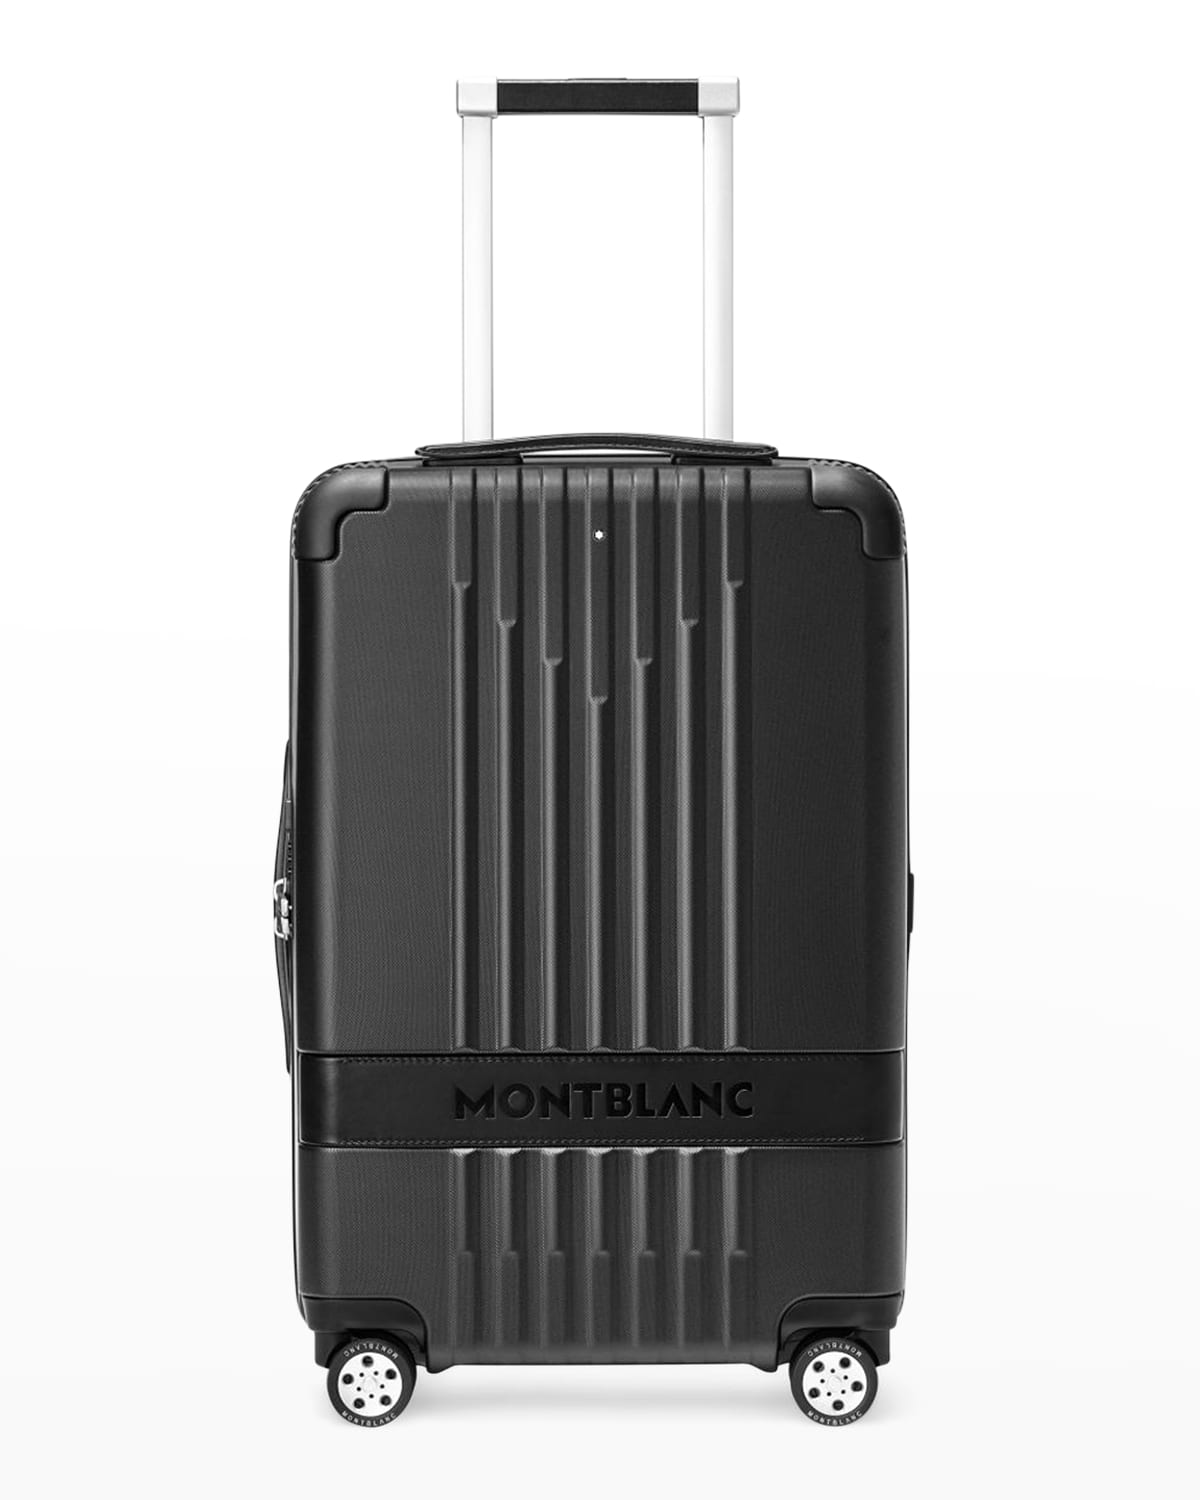 Montblanc My4810 Trolley Compact Cabin Luggage In Black